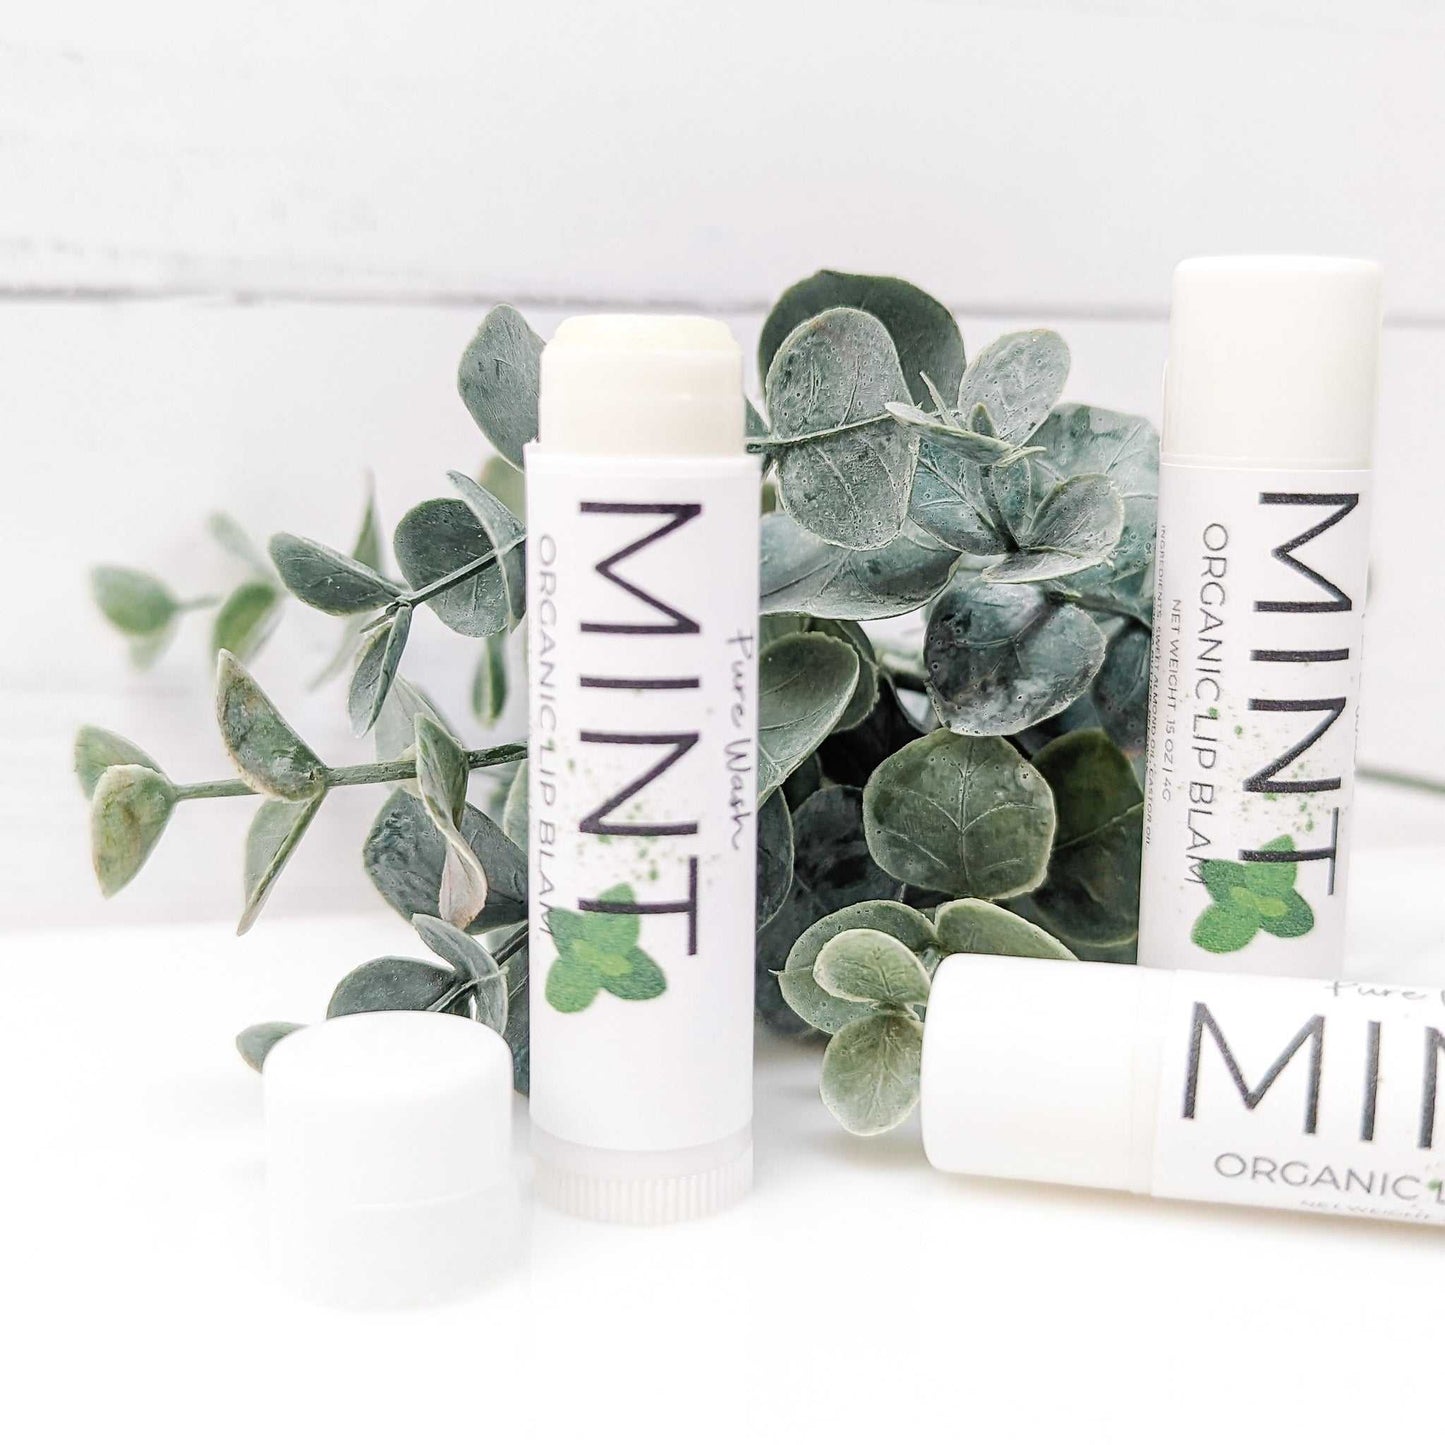 Rejuvenating Mint Lip Balm formulated with natural ingredients for supple, smooth lips | CG Pure Wash